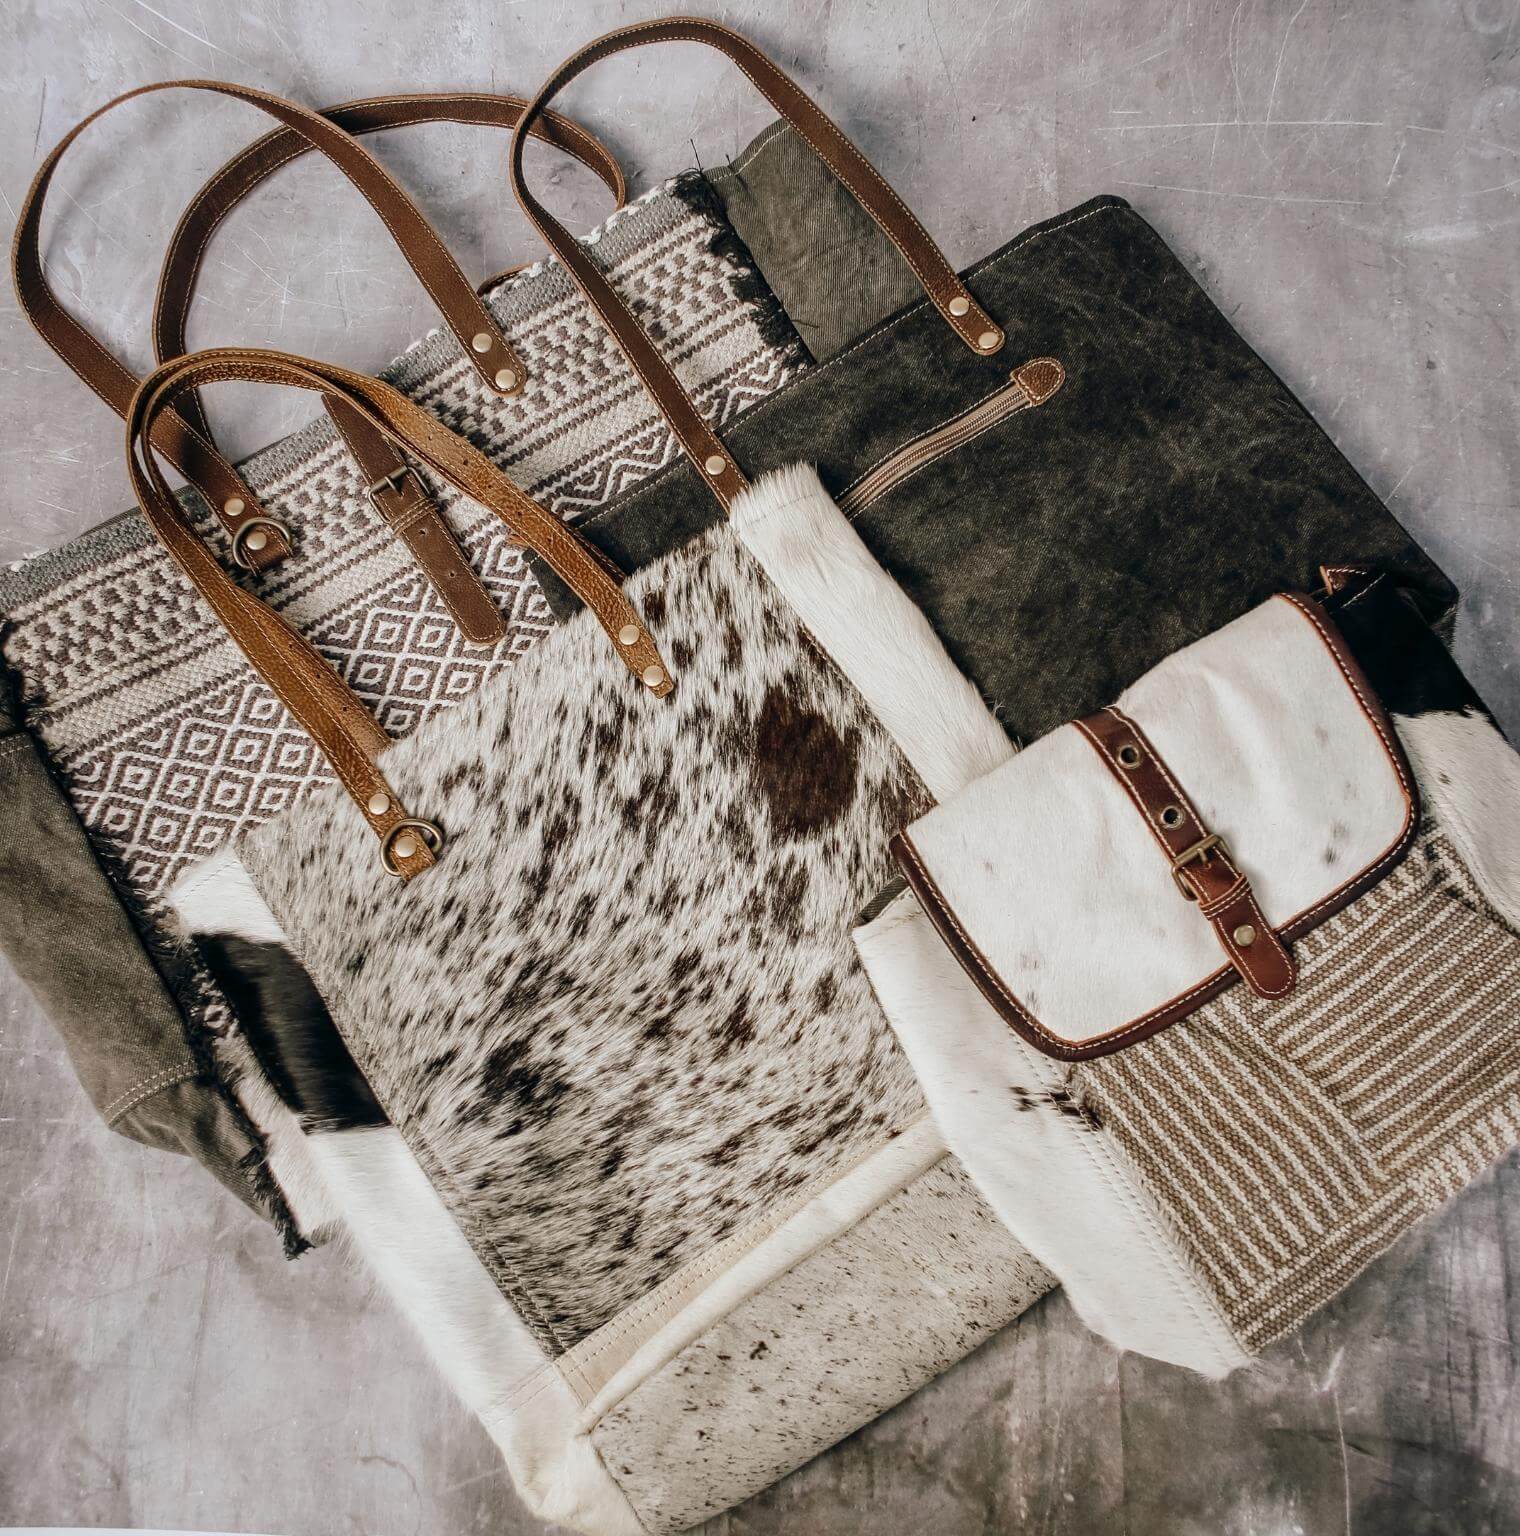 Different styles of bags